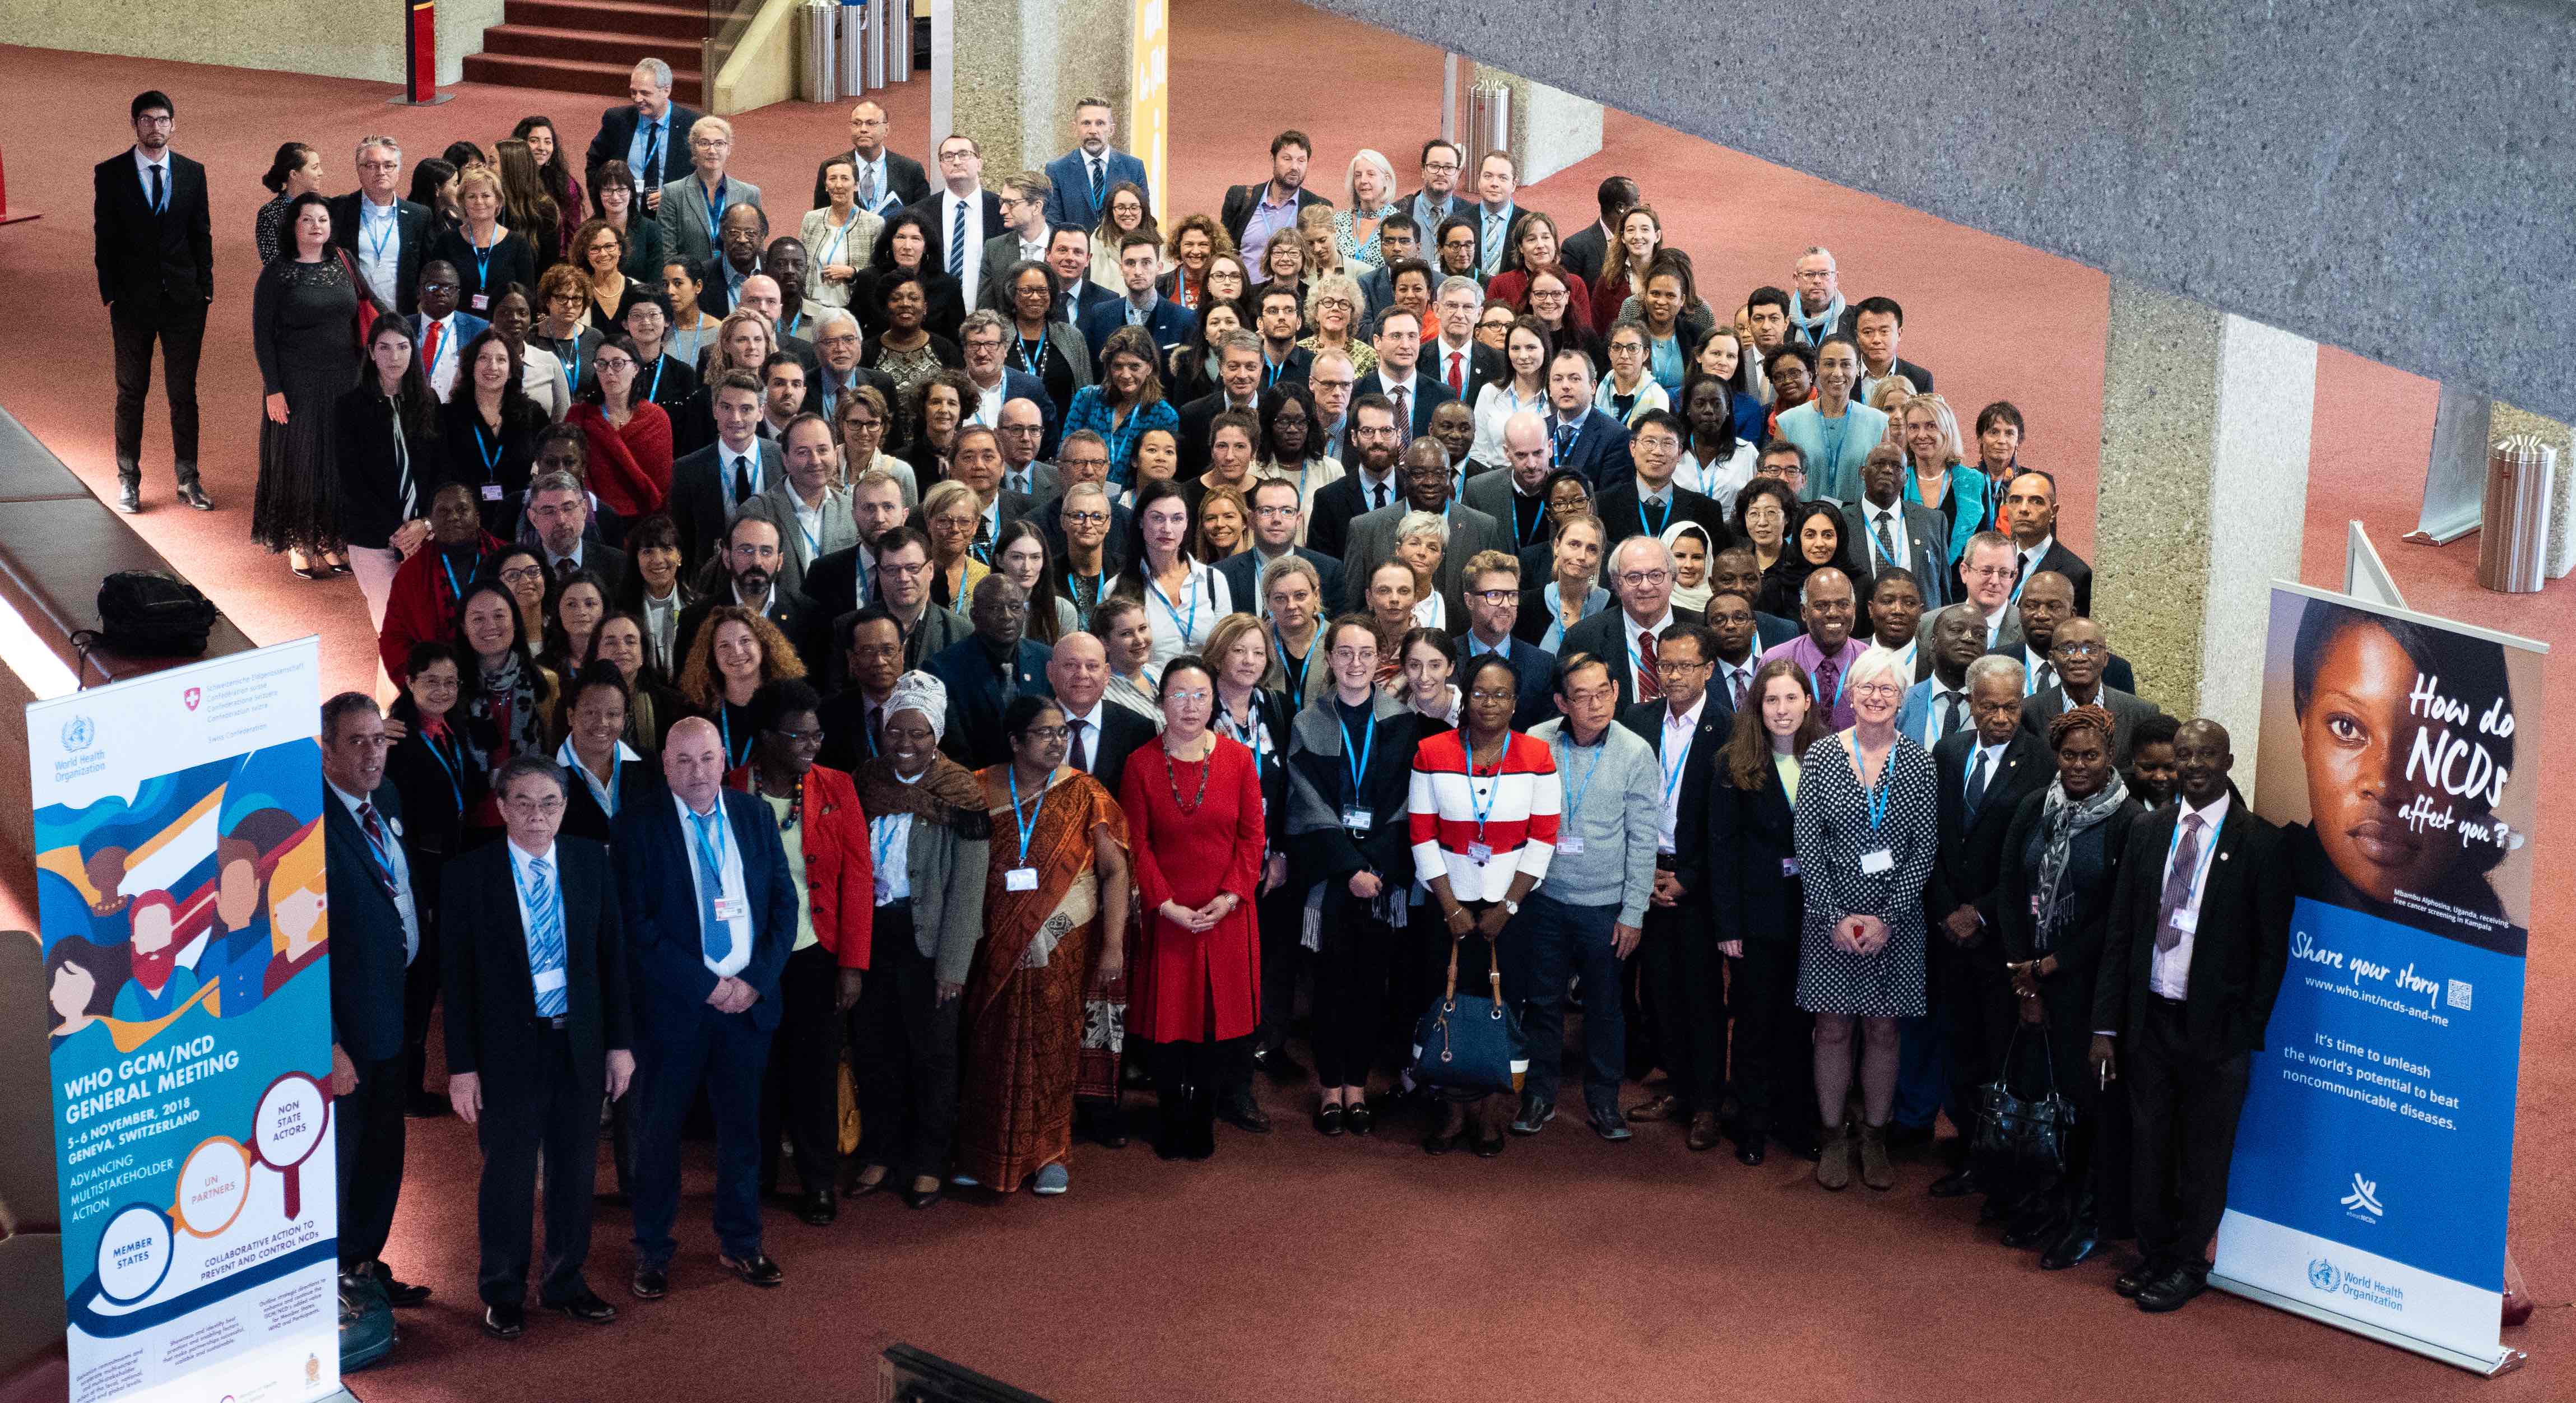 General Meeting of the WHO Global Coordination Mechanism on the Prevention and Control of Noncommunicable Diseases: Meeting Report